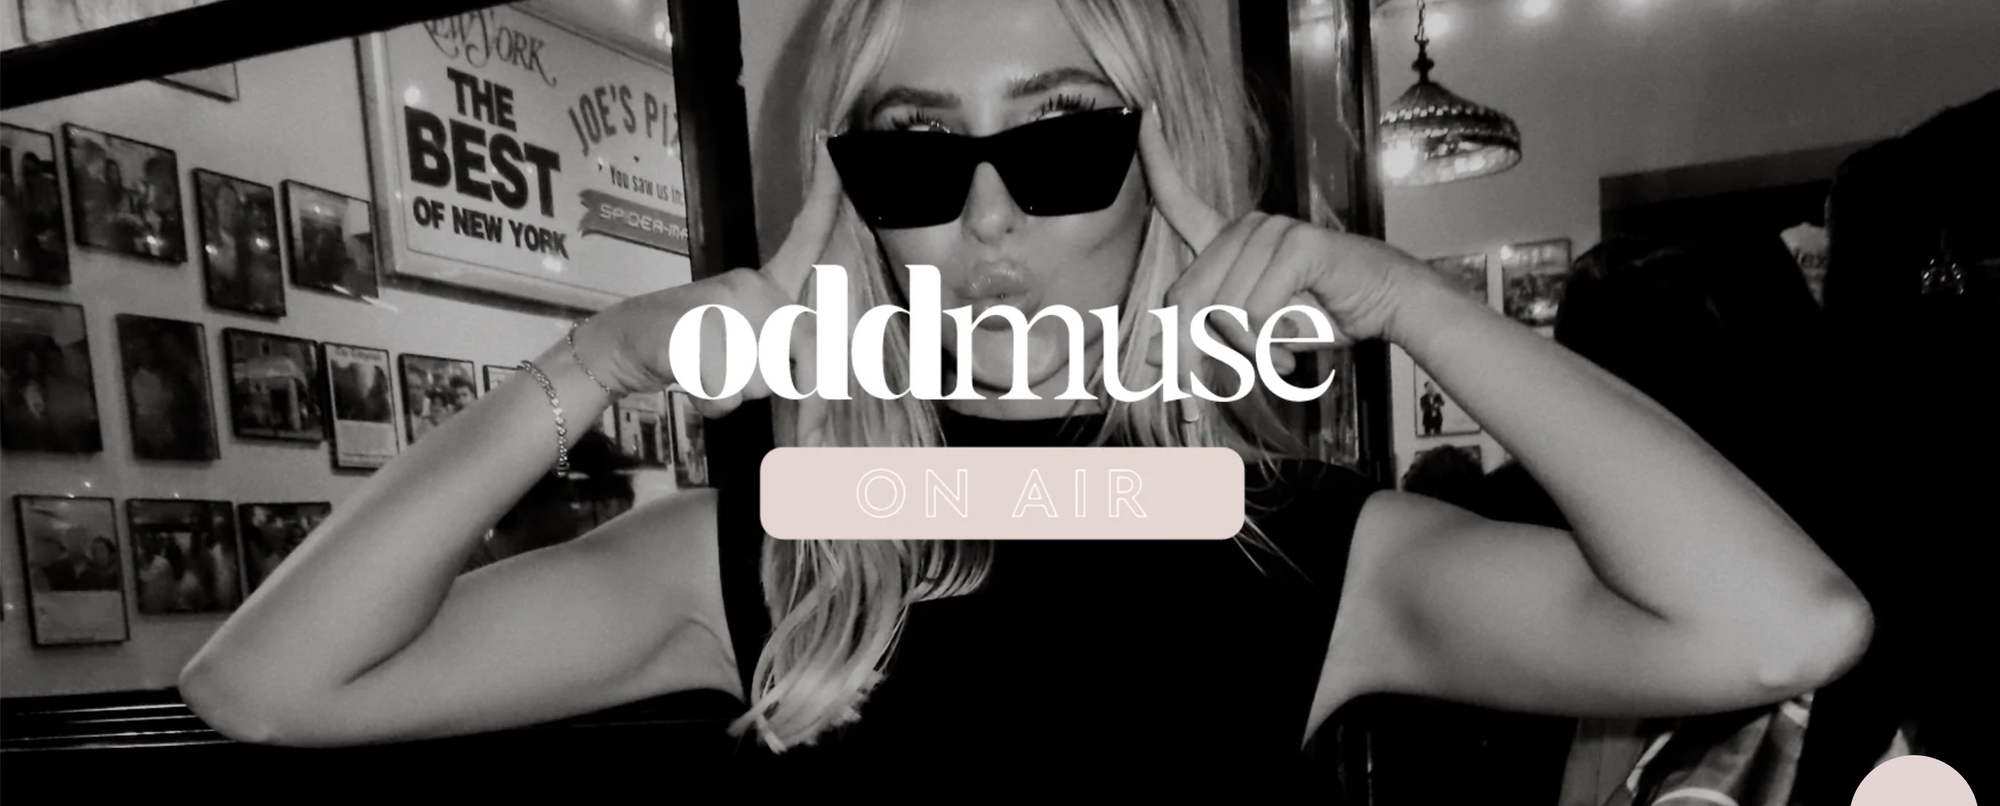 Odd Muse ~  On Air: Our New Live Shopping Experience Unveiled